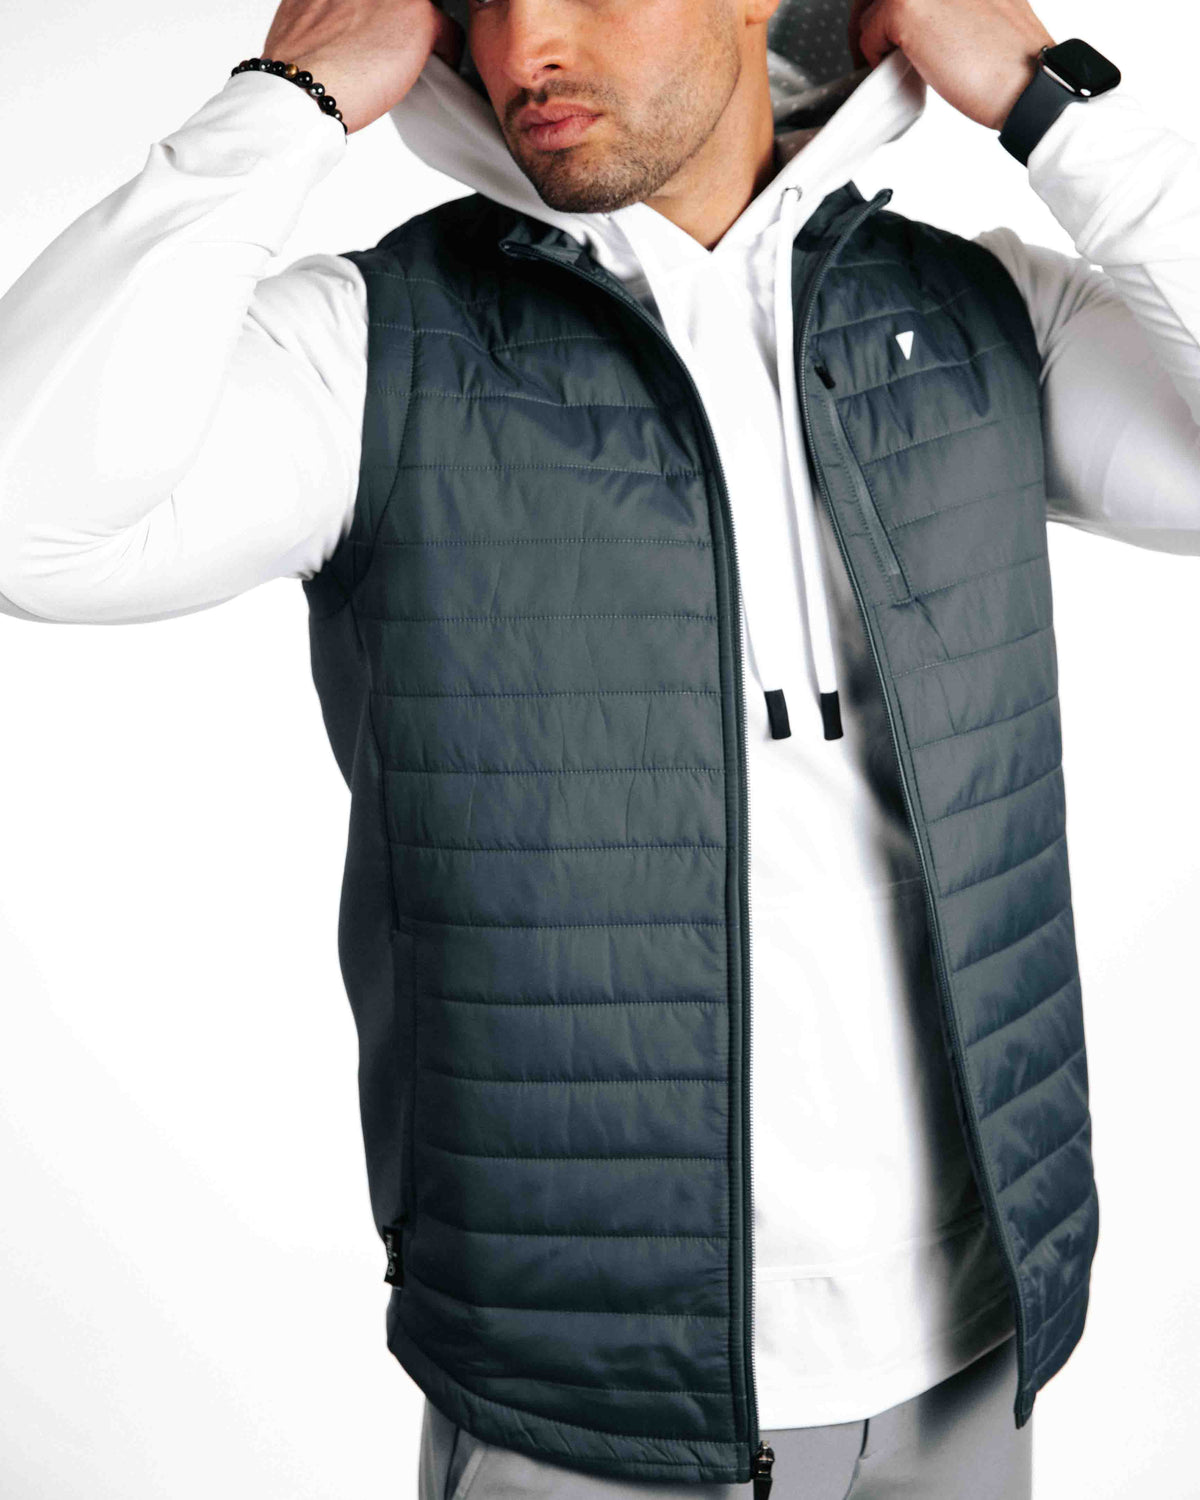 The Primo Golf Dark Gray Vest open with hoodie